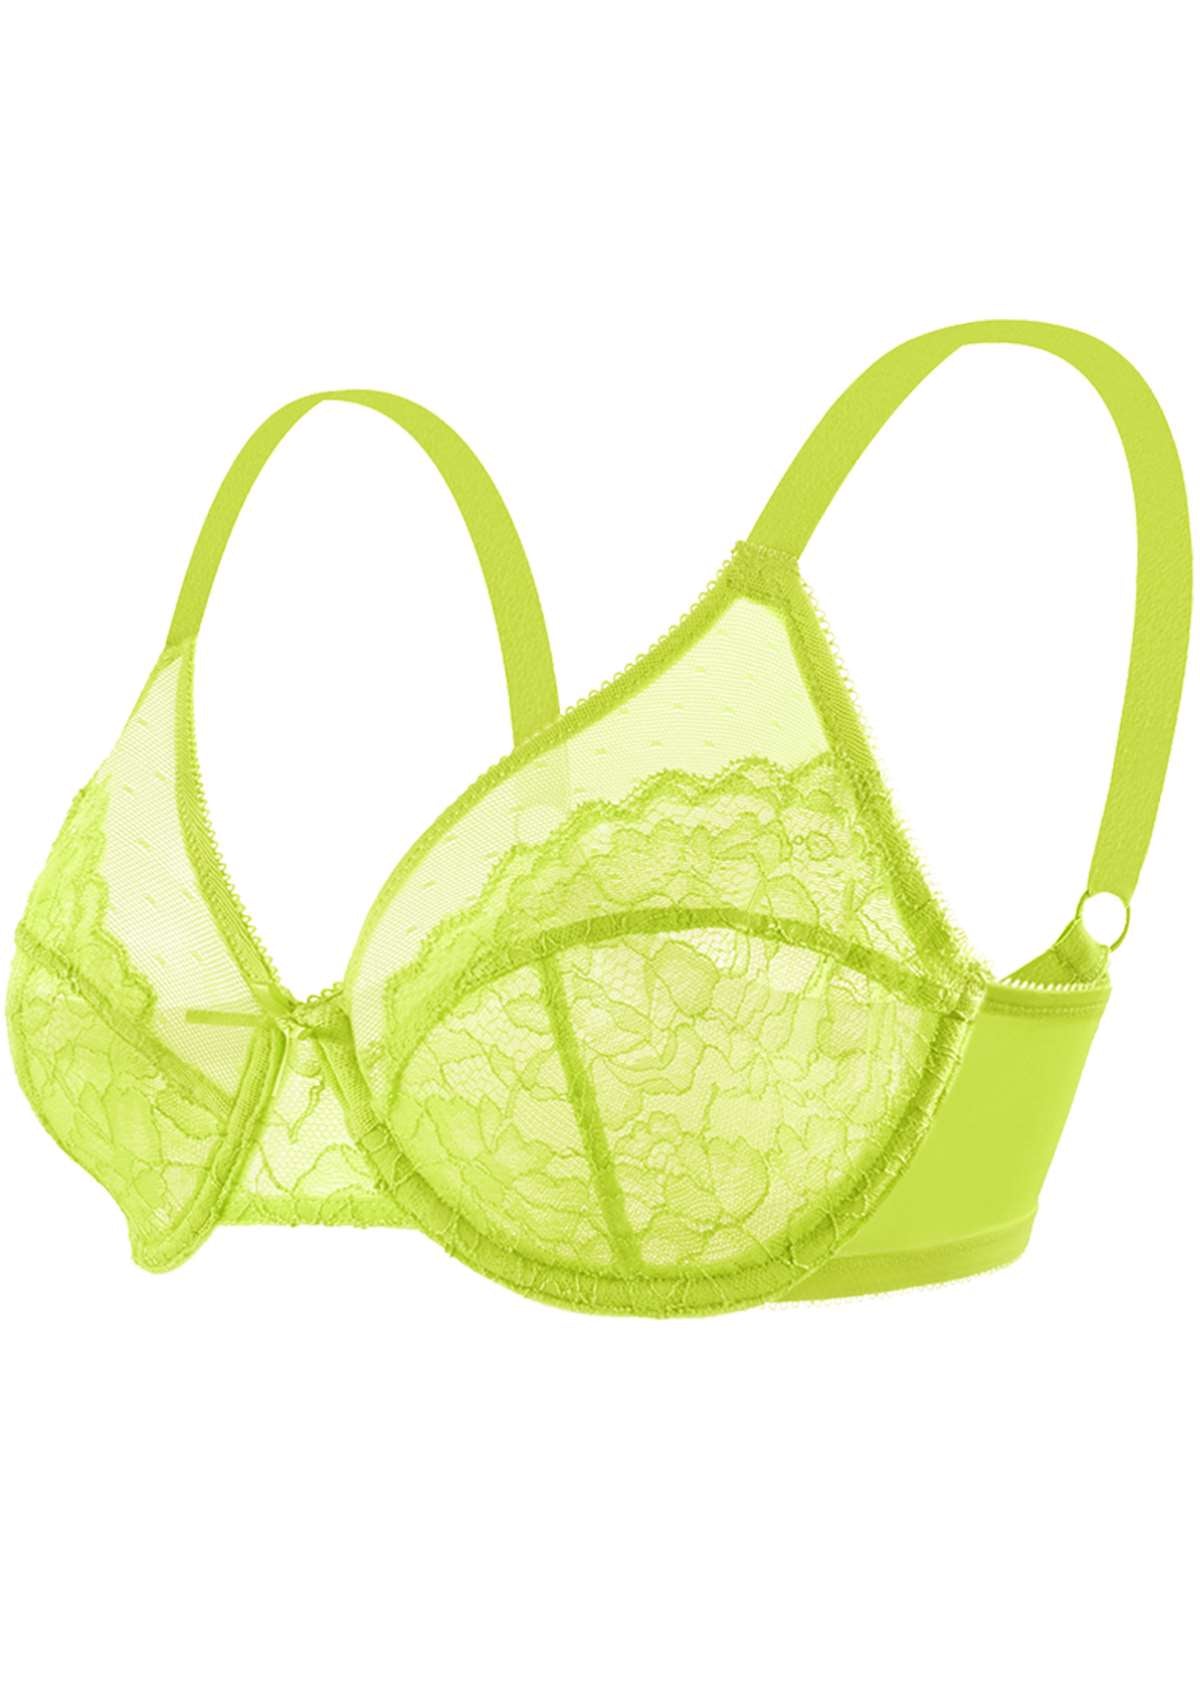 HSIA Enchante Full Cup Minimizing Bra: Supportive Unlined Lace Bra - Lime Green / 46 / D